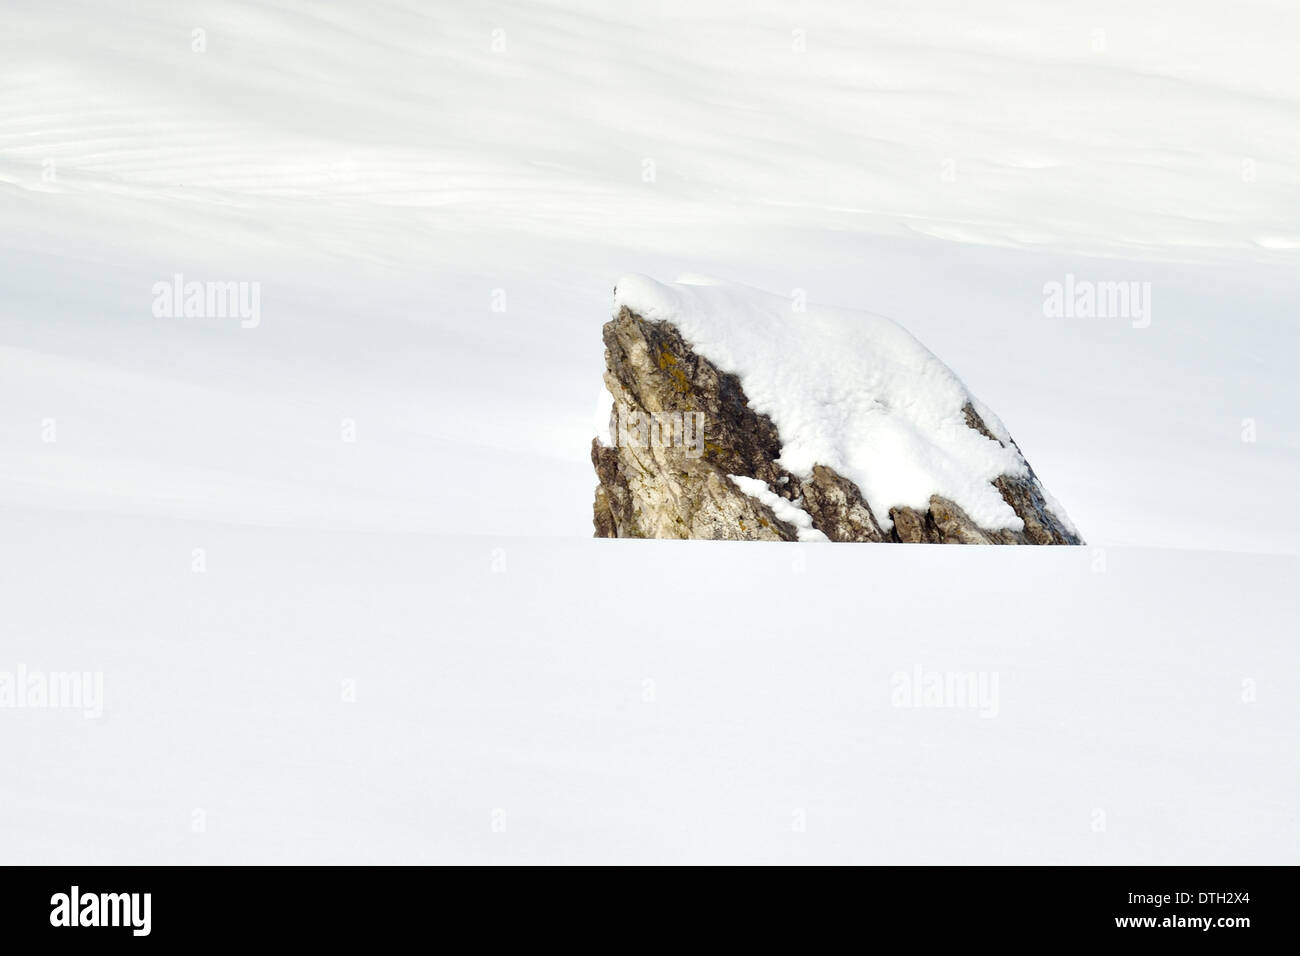 Rock in campo neve Foto Stock